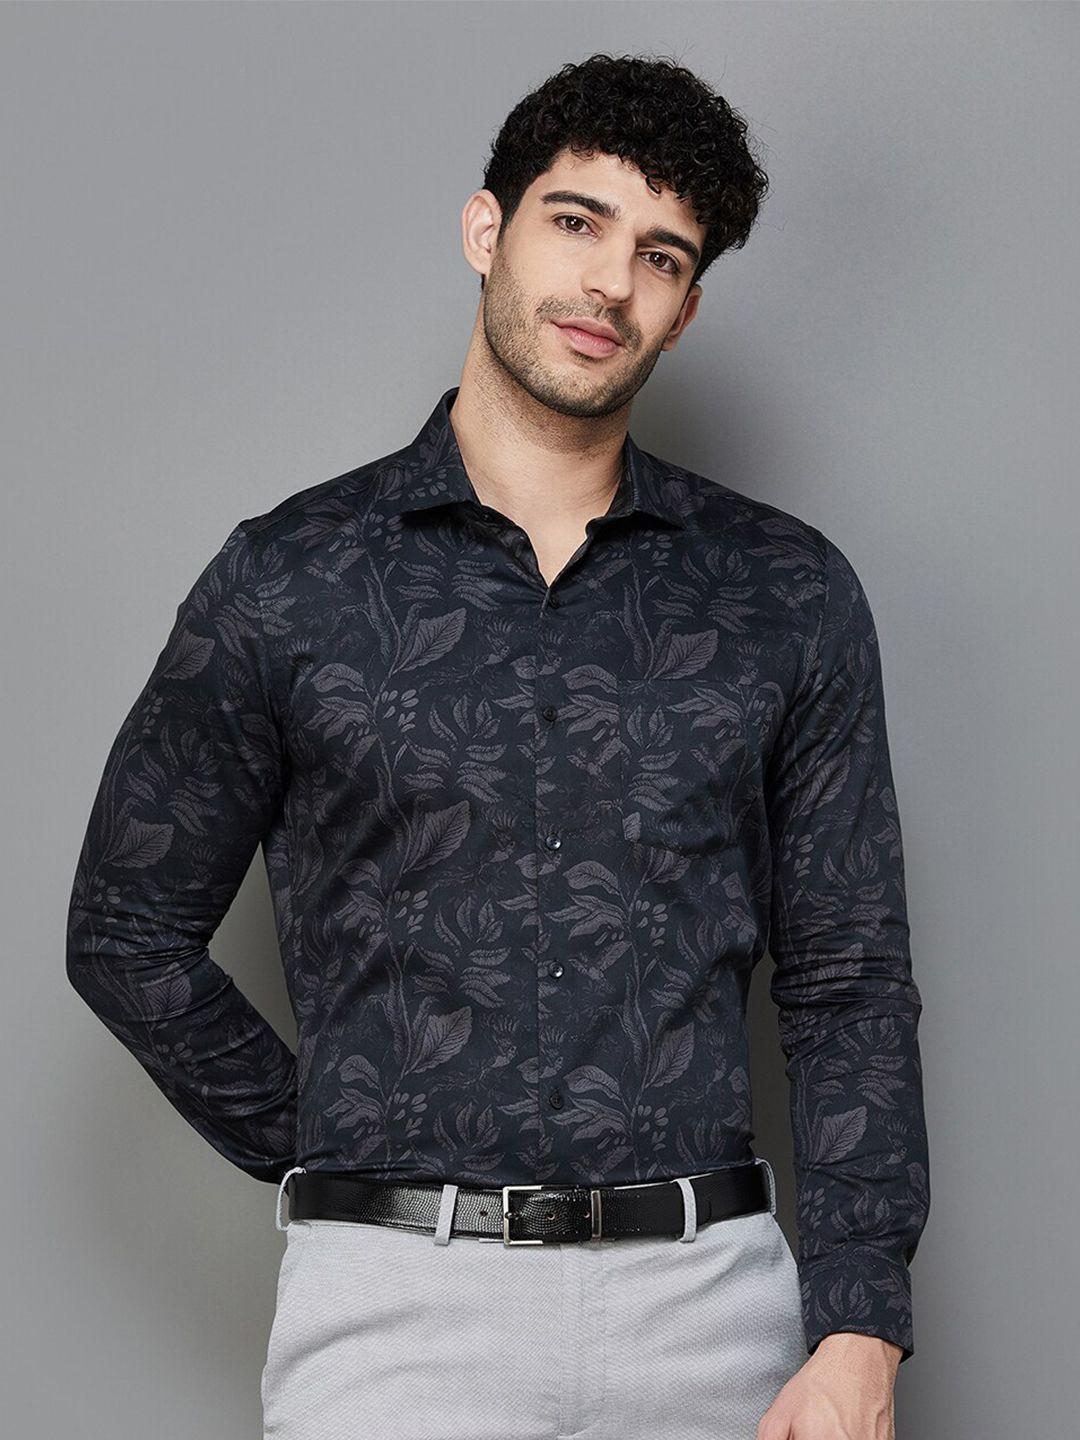 code by lifestyle men black floral opaque printed casual shirt